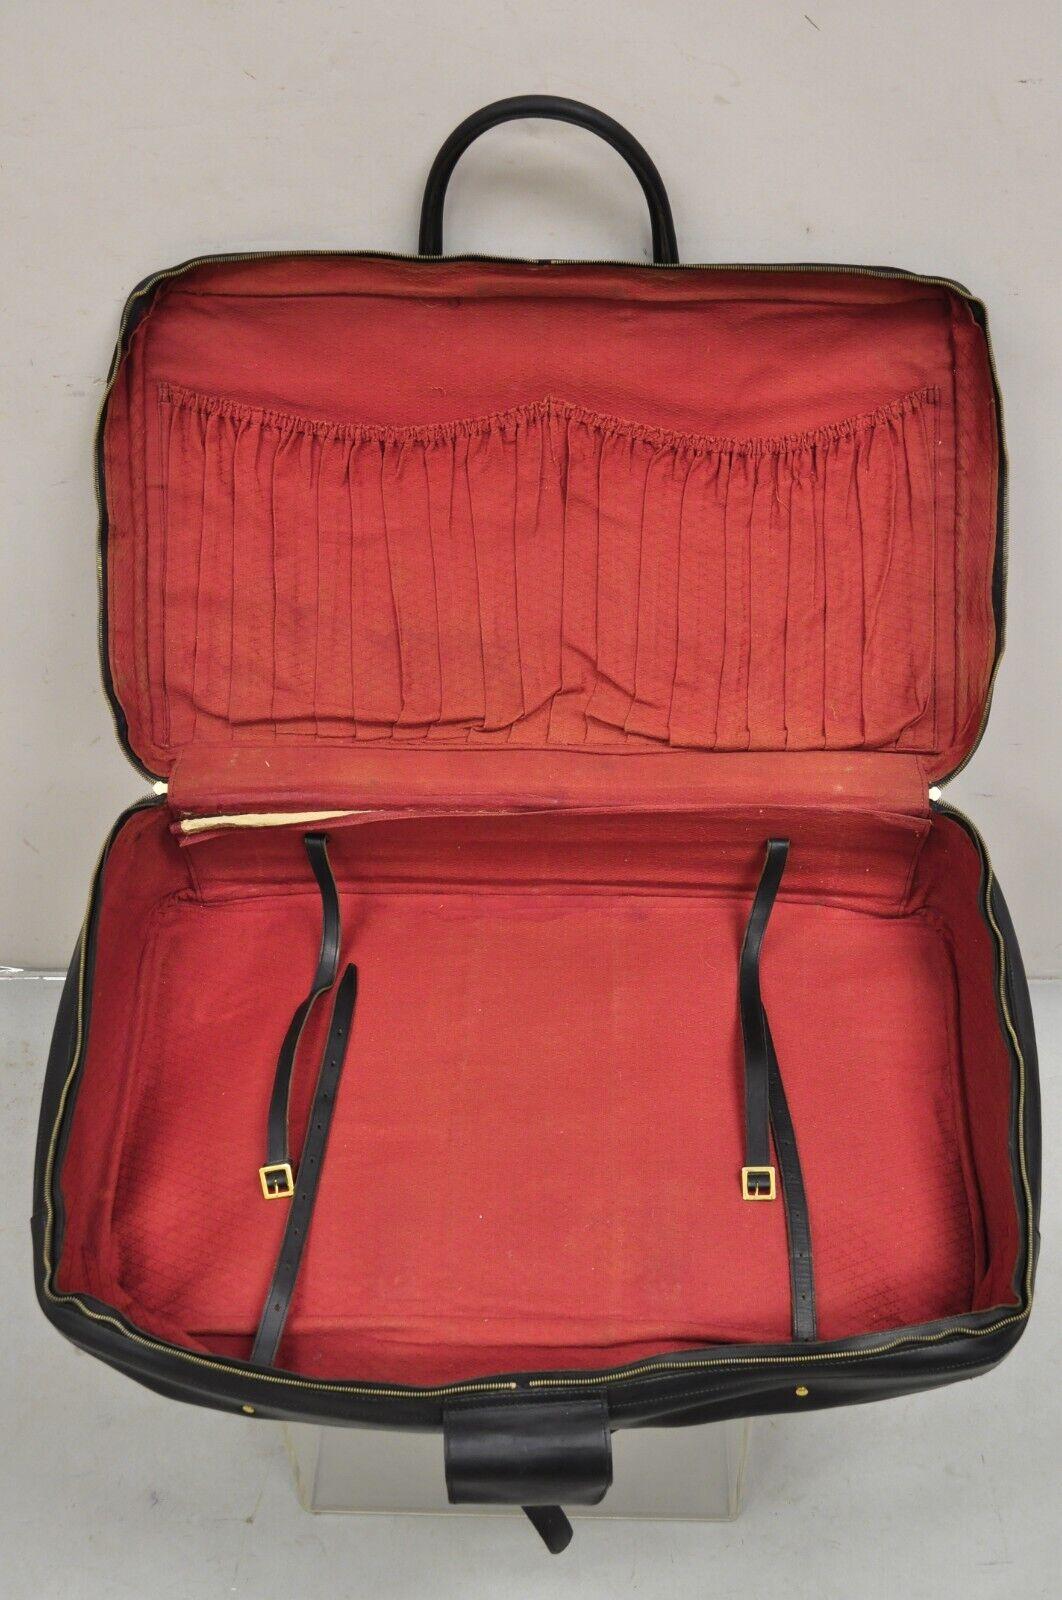 Vintage Gucci Large Black Leather Suitcase Luggage Travel Bag Green Red Webbing For Sale 3